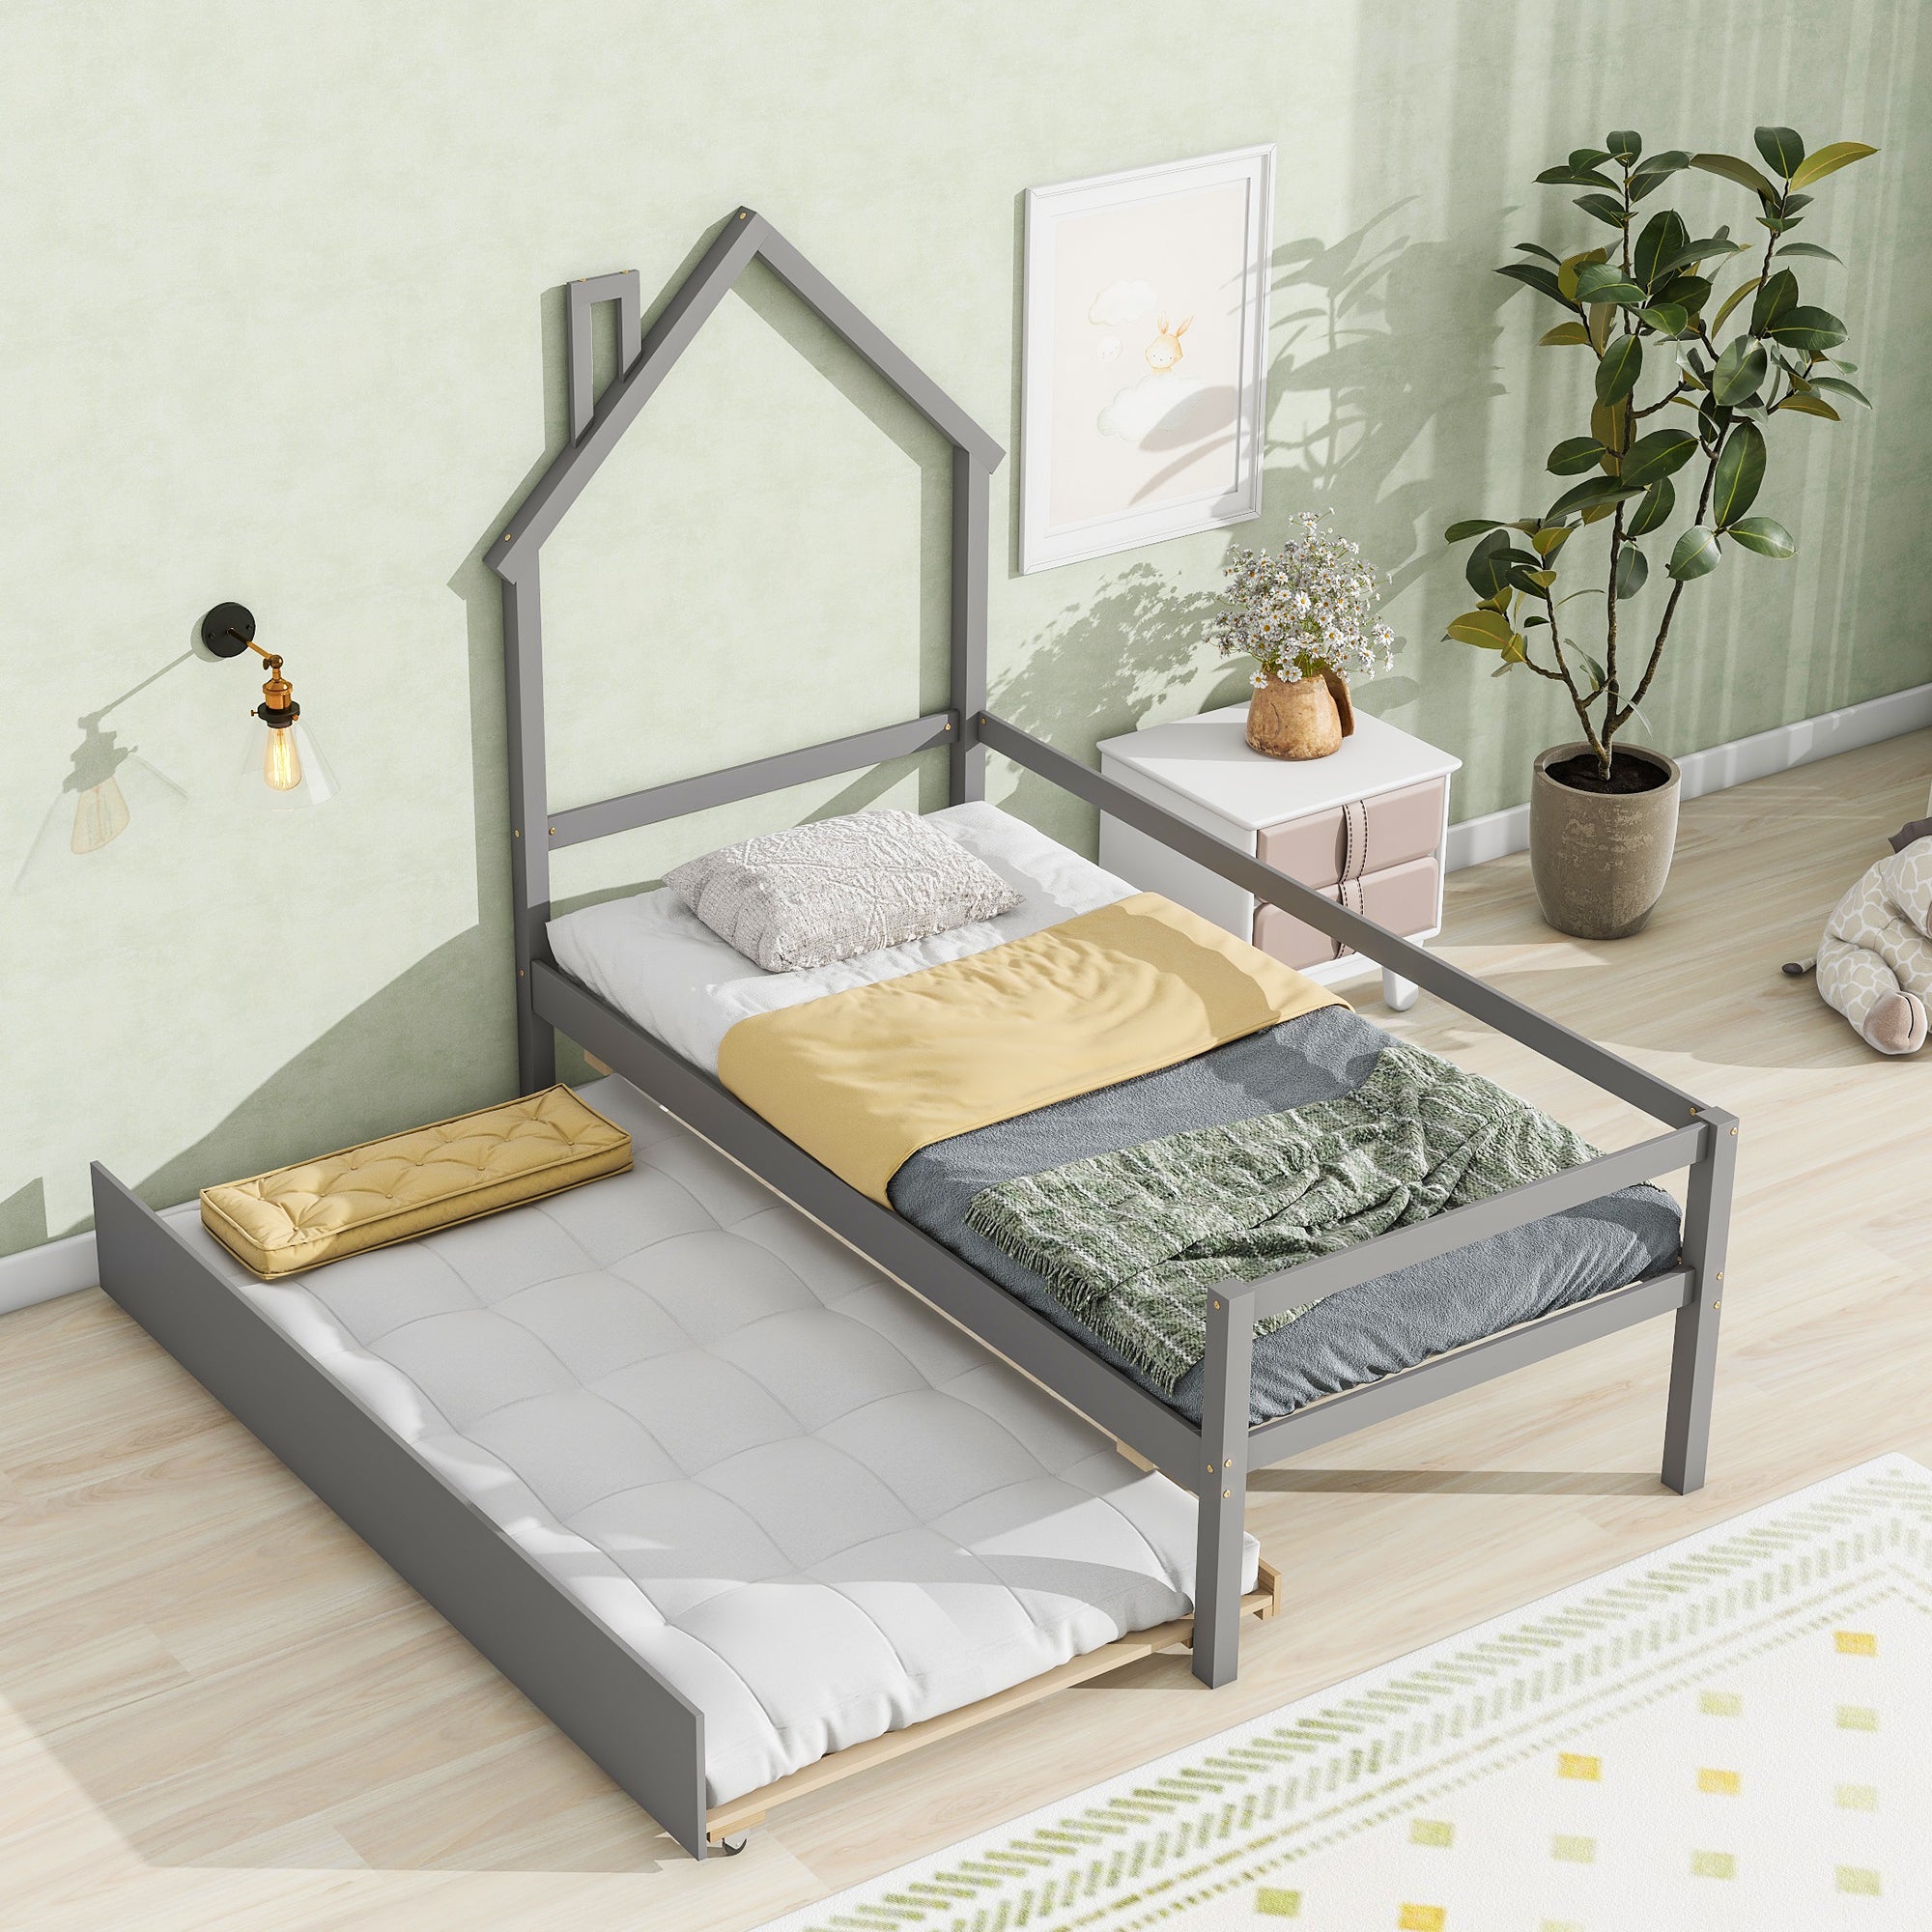 Twin House Wooden Daybed with trundle, Twin House twin-grey-wood-bedroom-american design-pine-pine